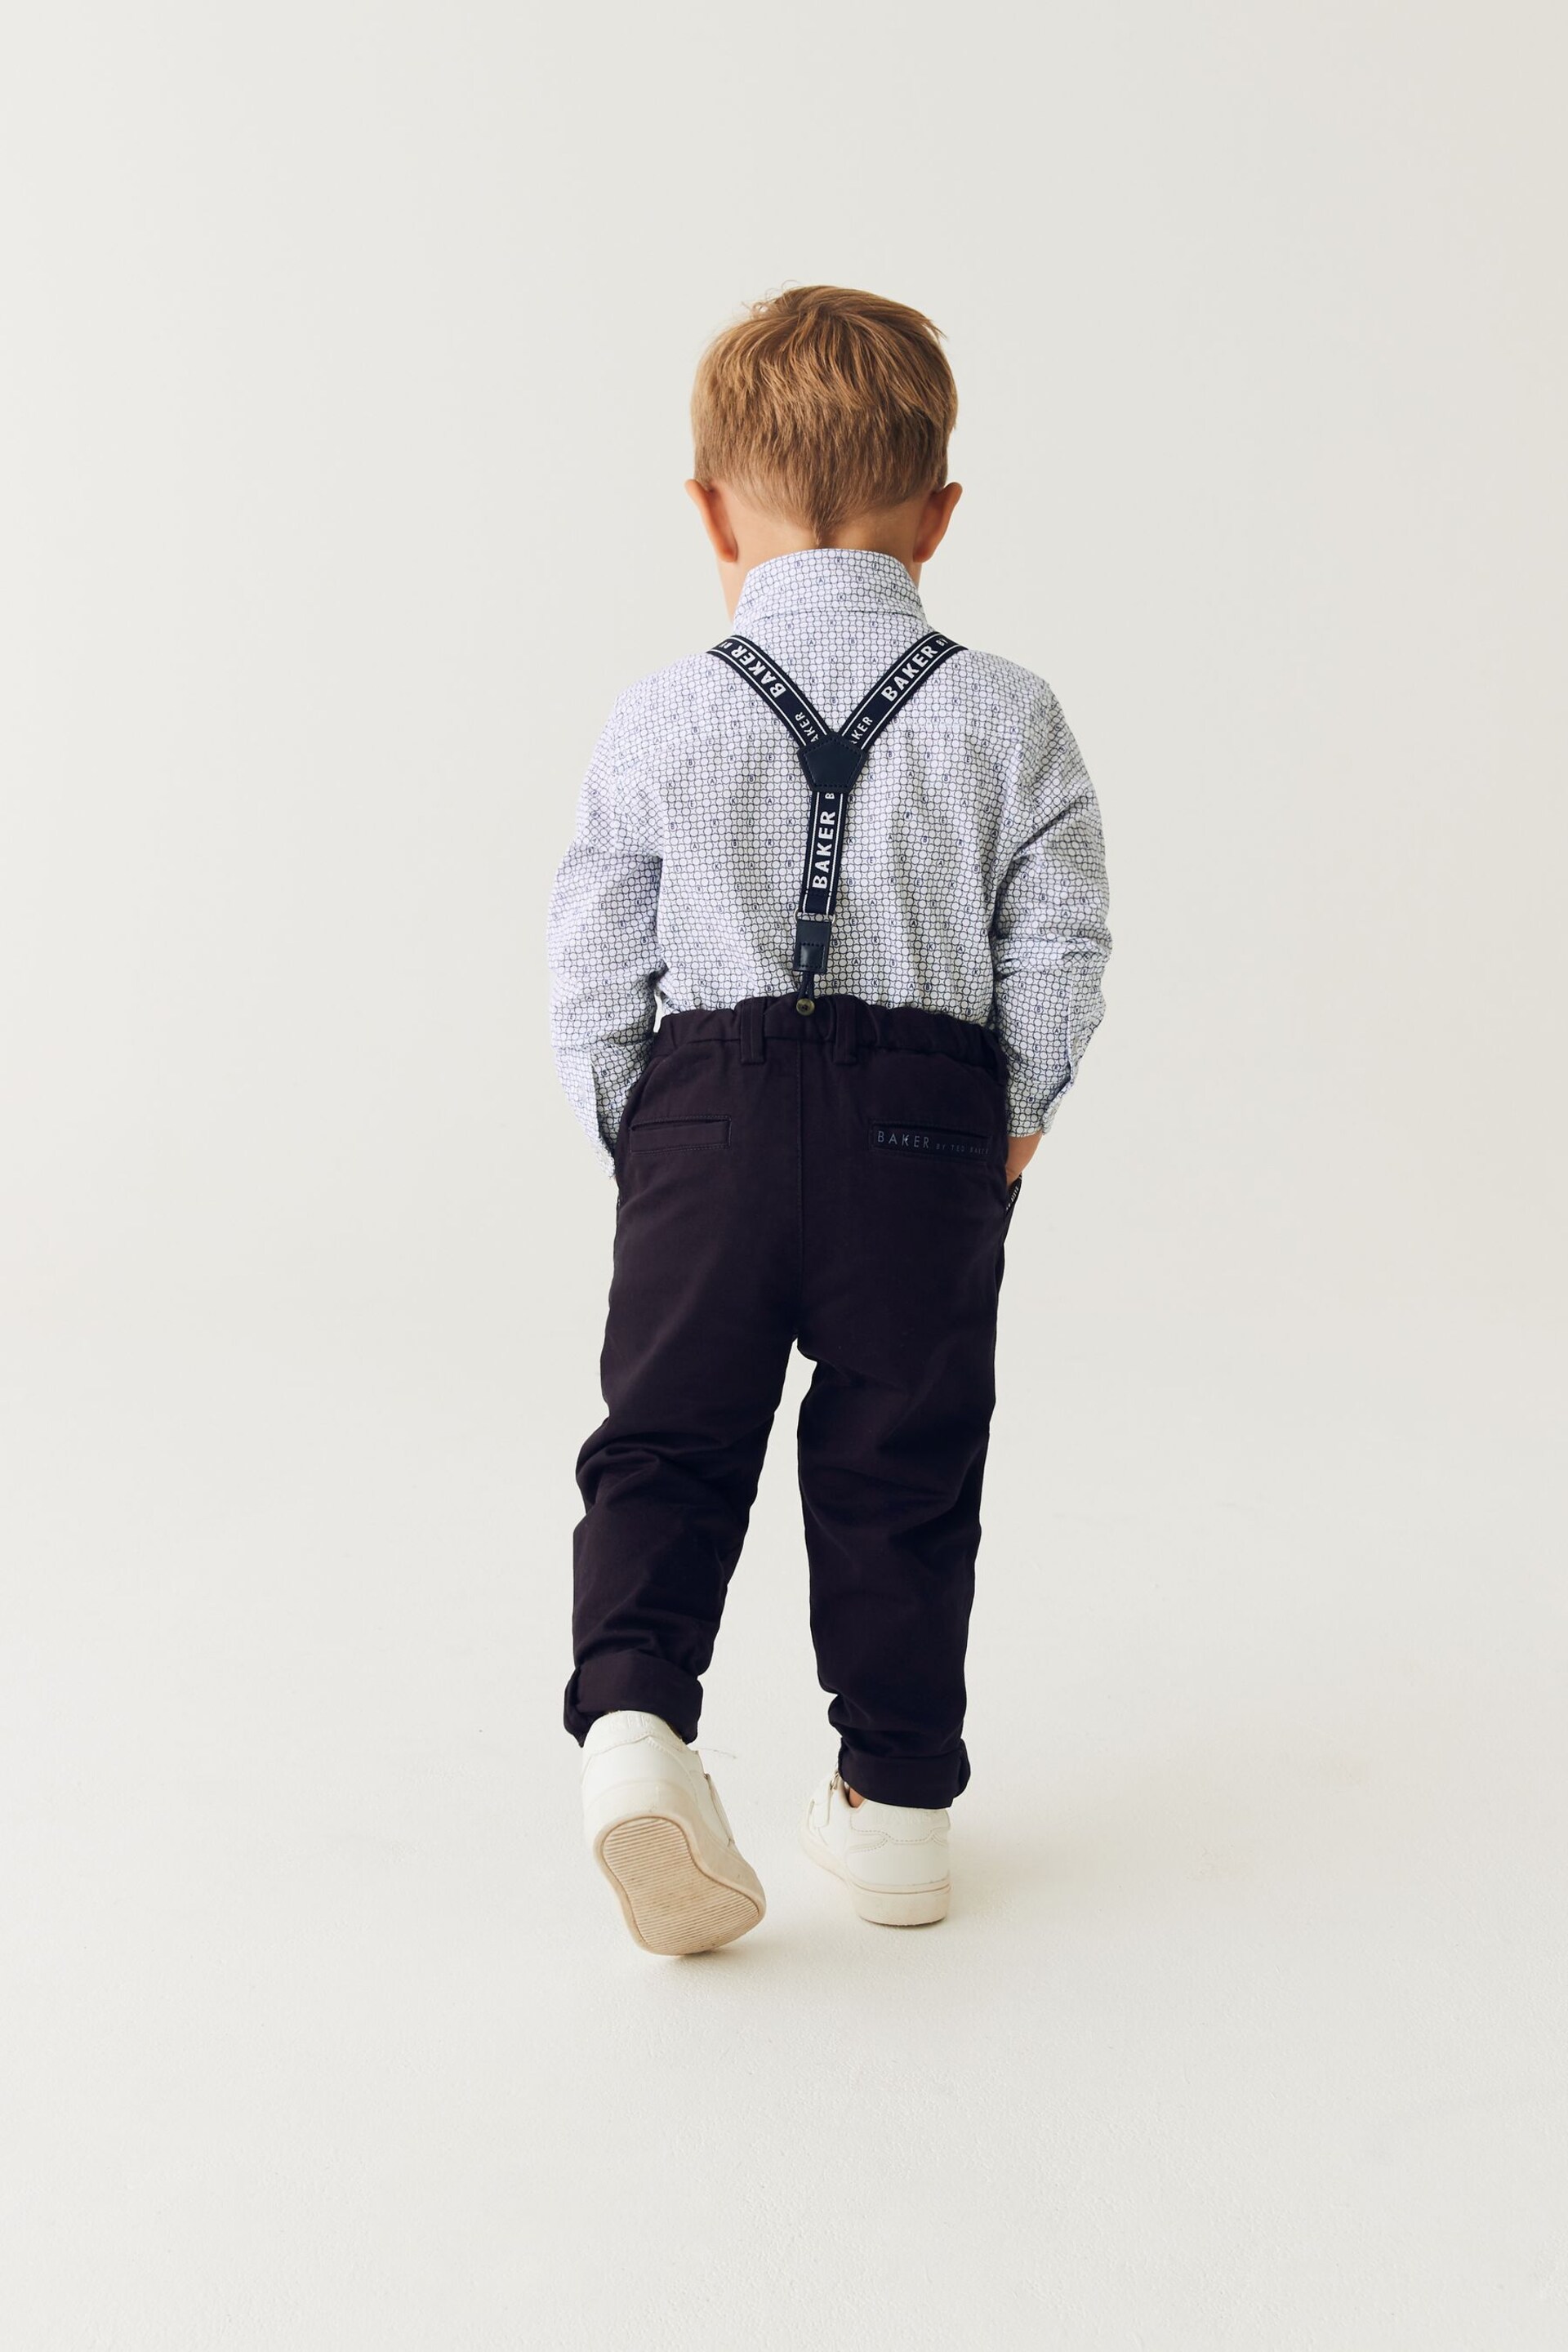 Baker by Ted Baker (3mths-6yrs) Shirt, Braces and Chino Set - Image 2 of 14